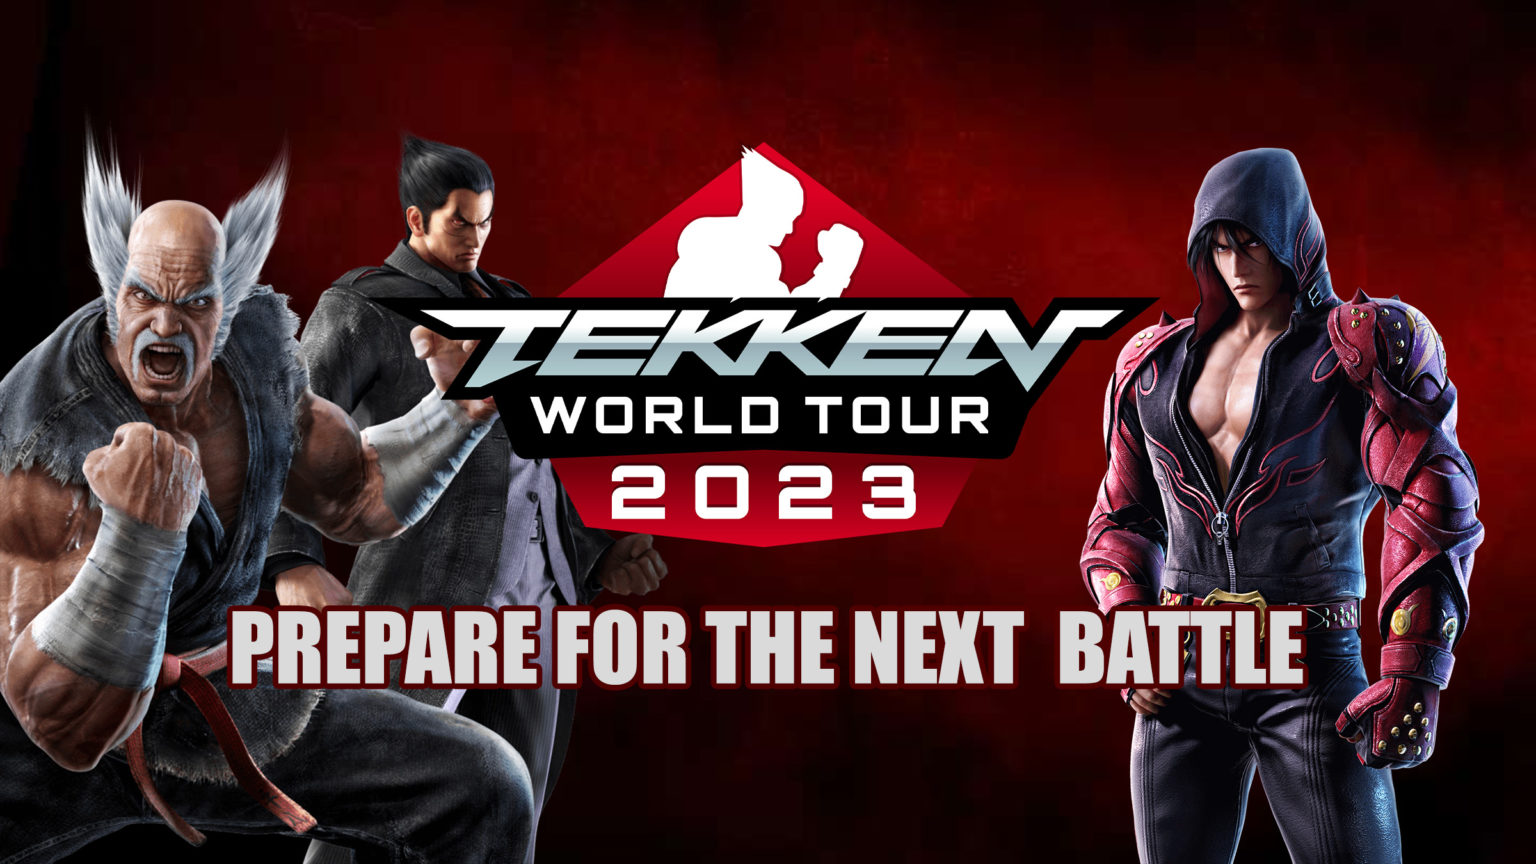 TEKKEN WORLD TOUR 2023 RETURNS WITH ALL INPERSON EVENTS STARTING MARCH